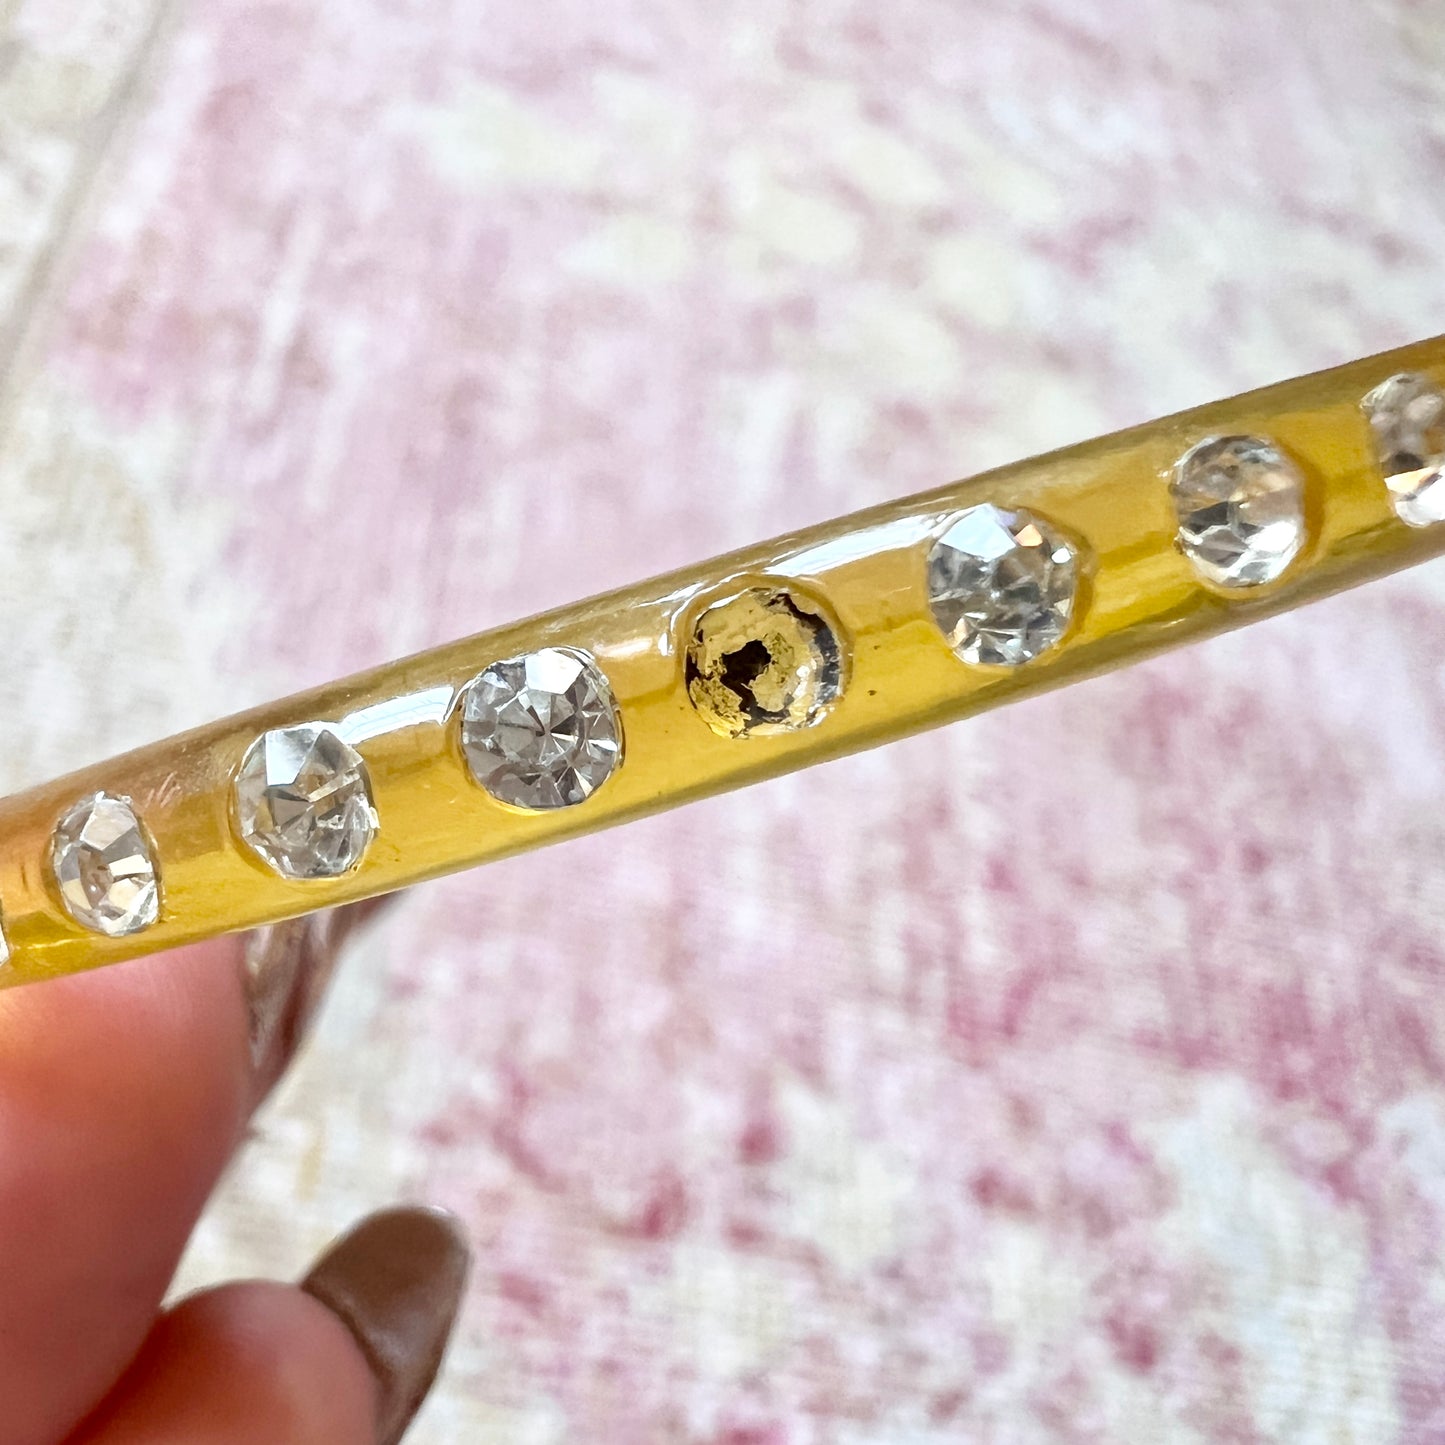 [AS-IS] 1960s Rhinestone Lucite Bangle